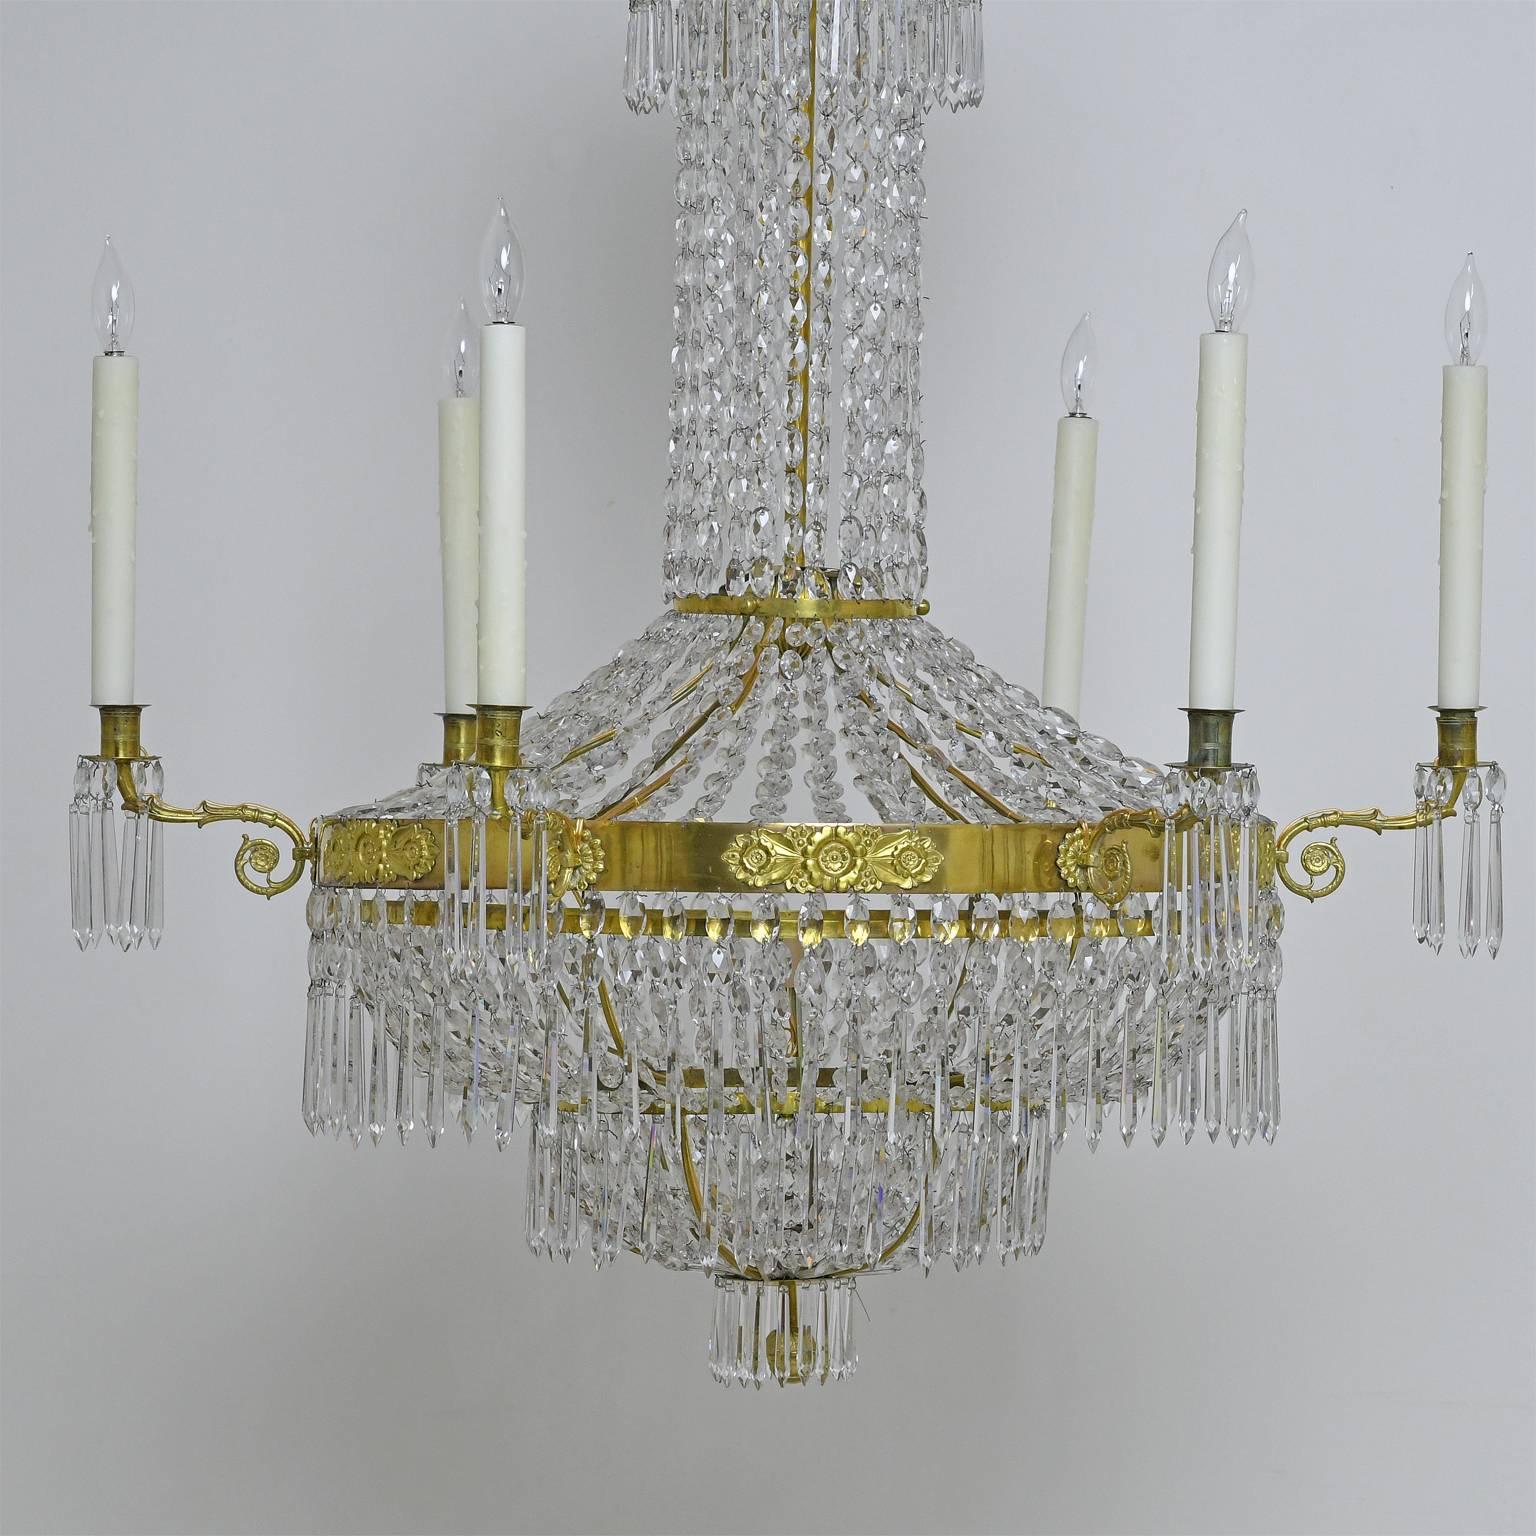 A very fine and large-scale Antique Gustavian or Karl Johan Empire crystal chandelier with gilt bronze armature featuring a center ring with thinly pressed rosettes and foliage between the six candle holders. The diminishing brass rings which appear